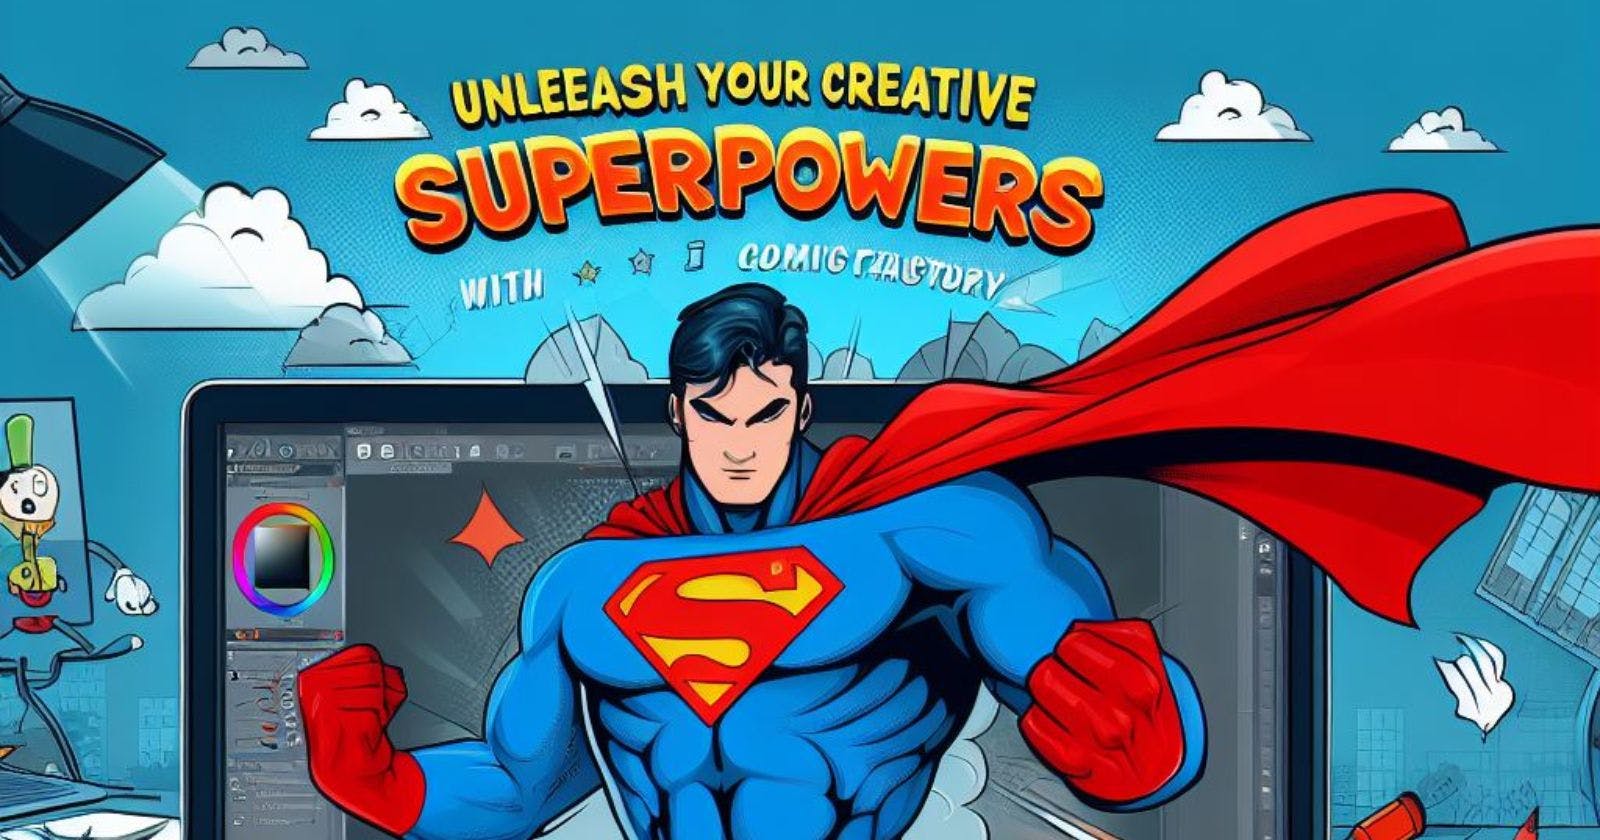 Unleash Your Creative Superpowers with AI Comic Factory